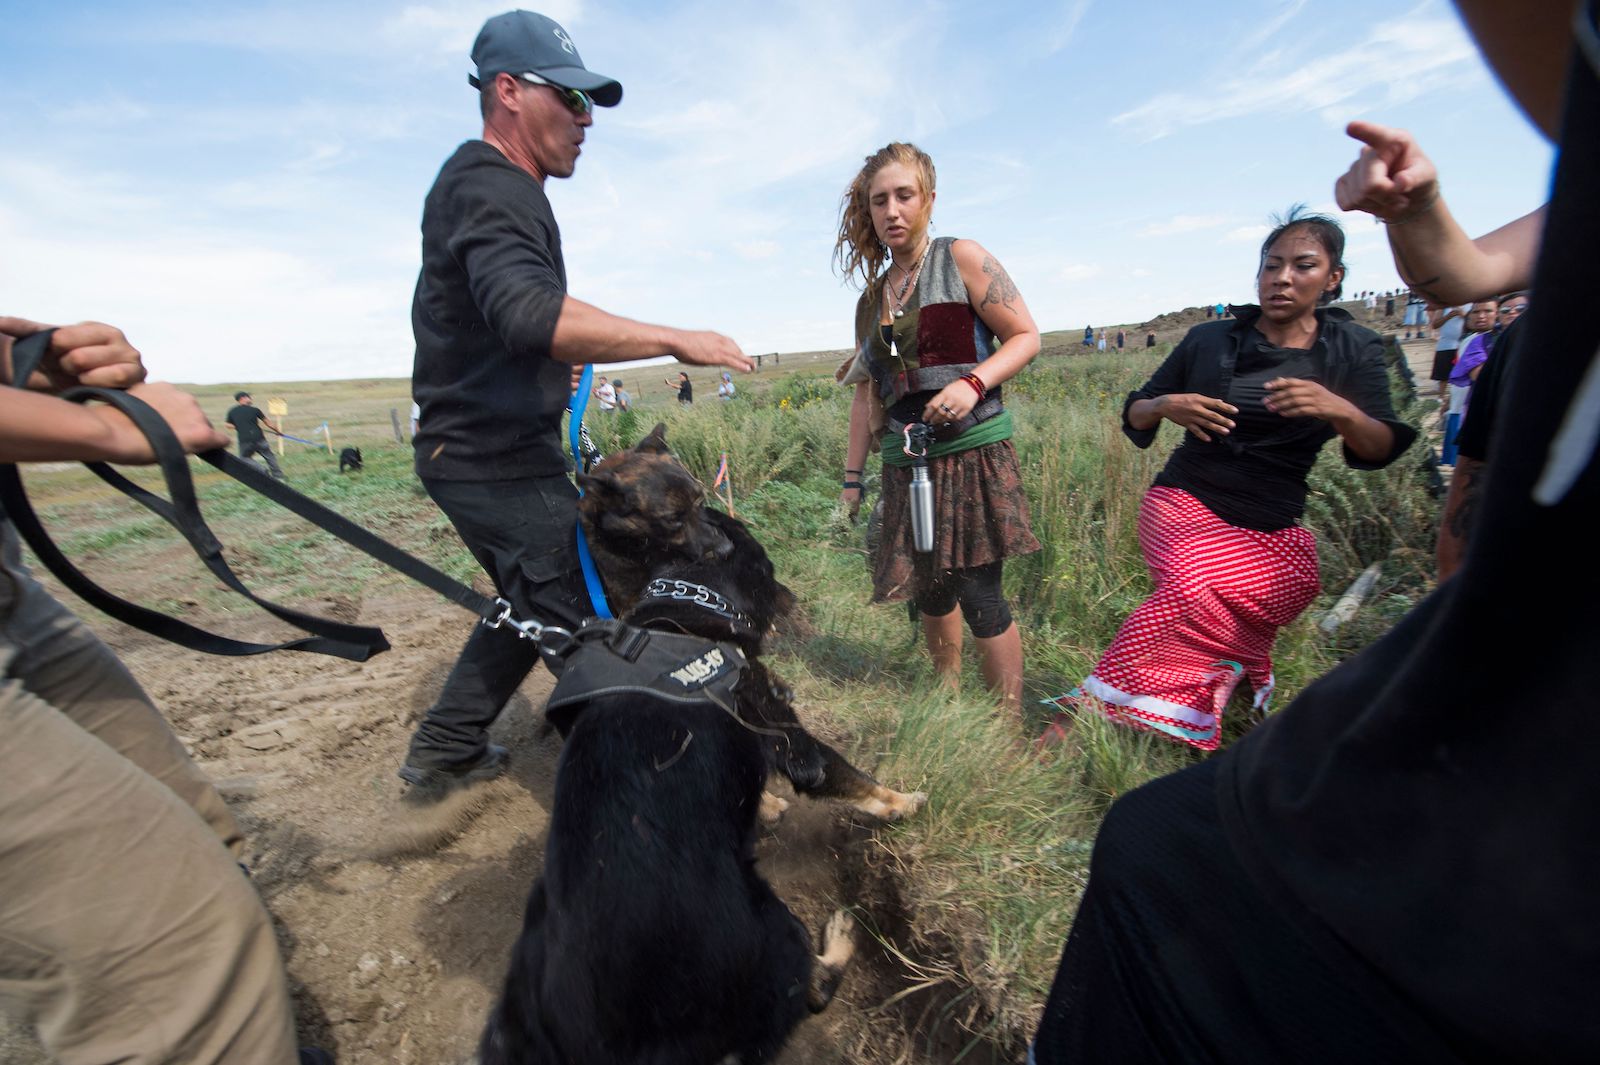 Private security guards hold back dogs near Dakota Access pipeline protesters